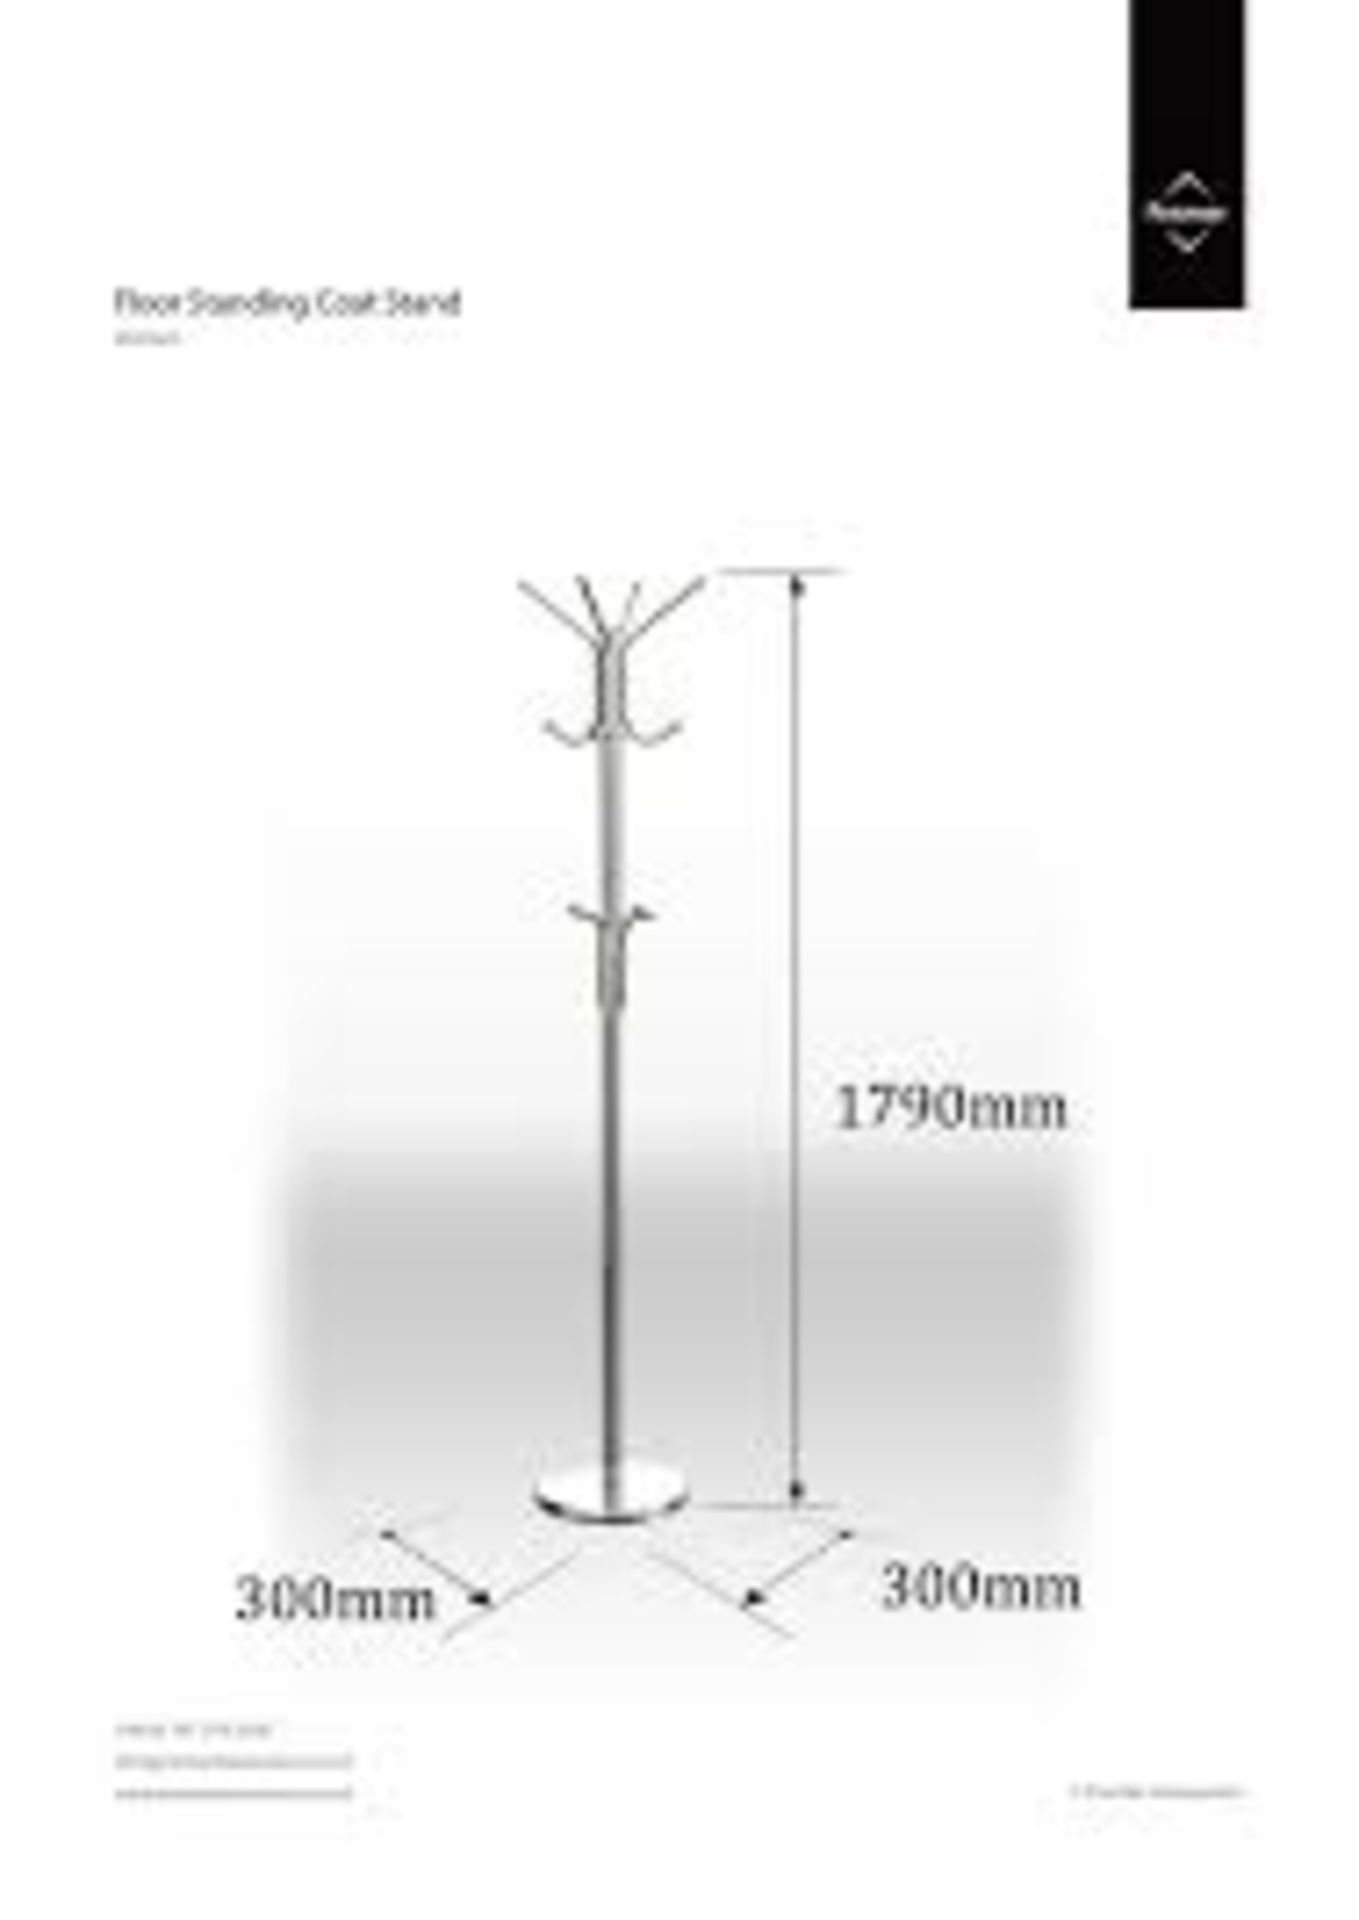 Boxed Premier Coat Stands RRP £55 Each (Pictures Are For Illustration Purposes Only) (Appraisals